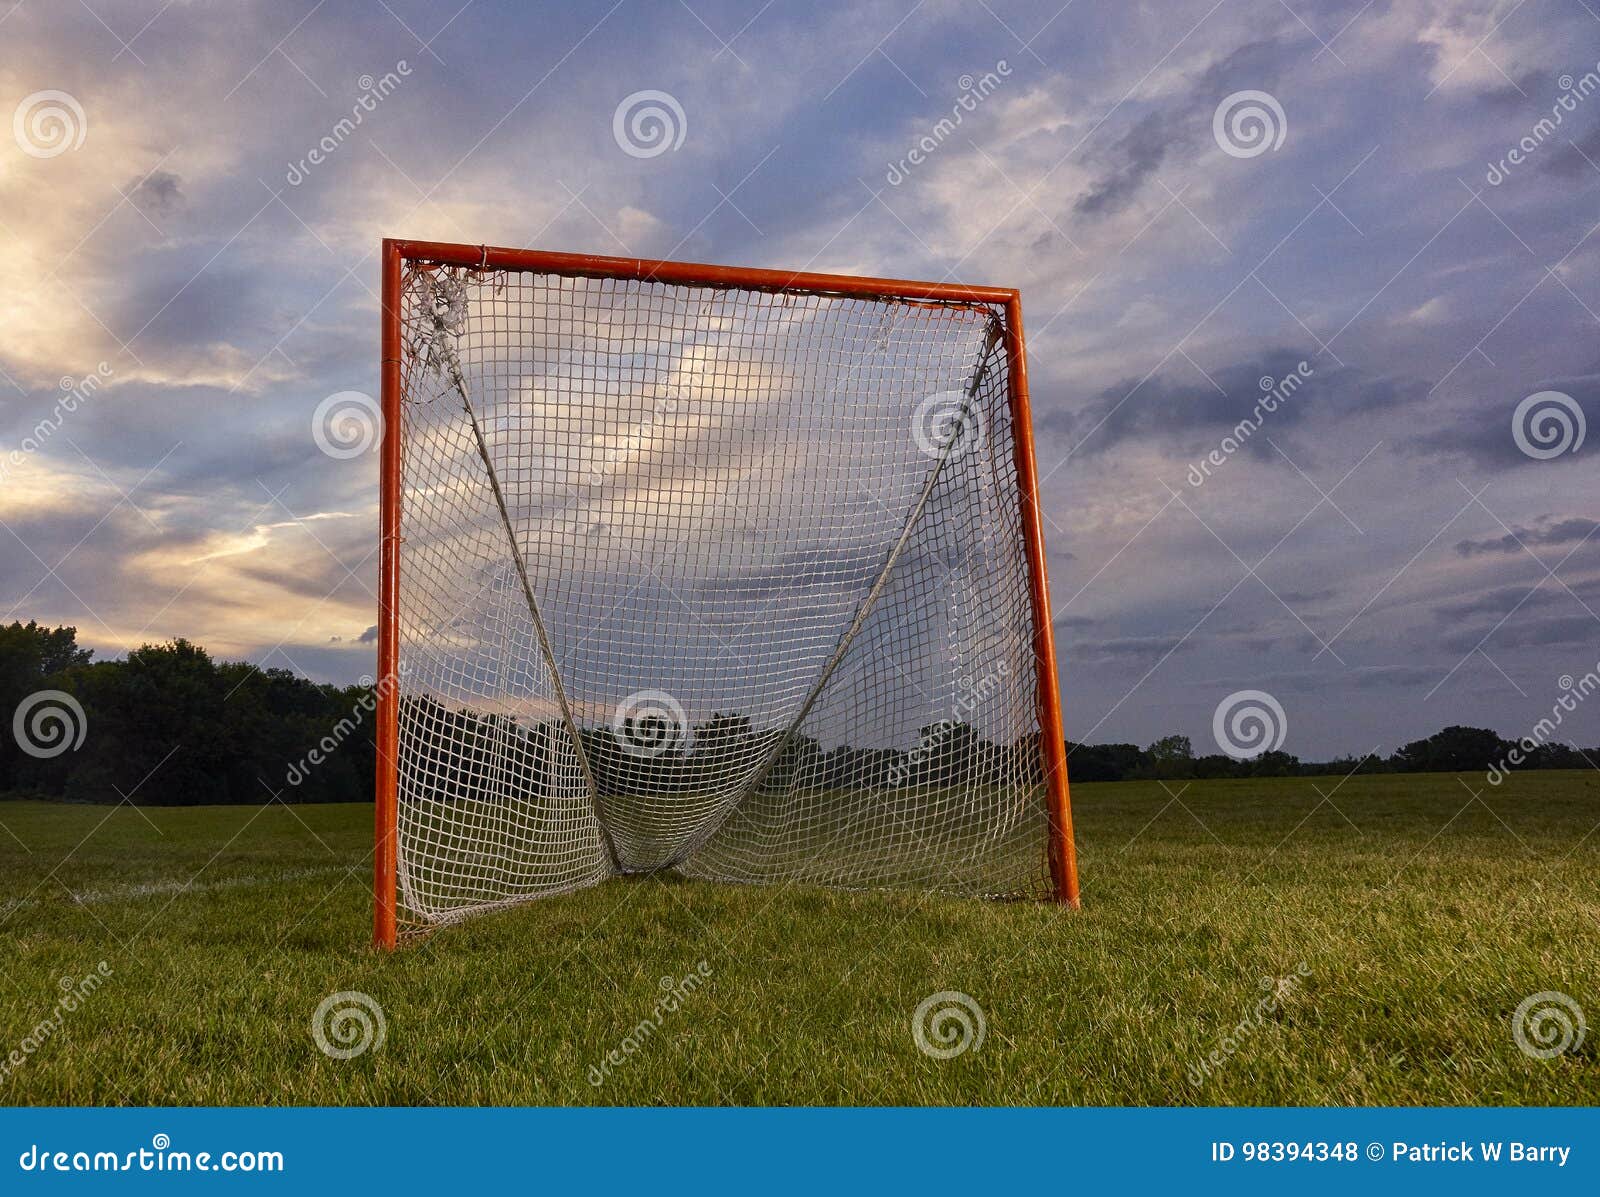 lacrosse goal with sunset